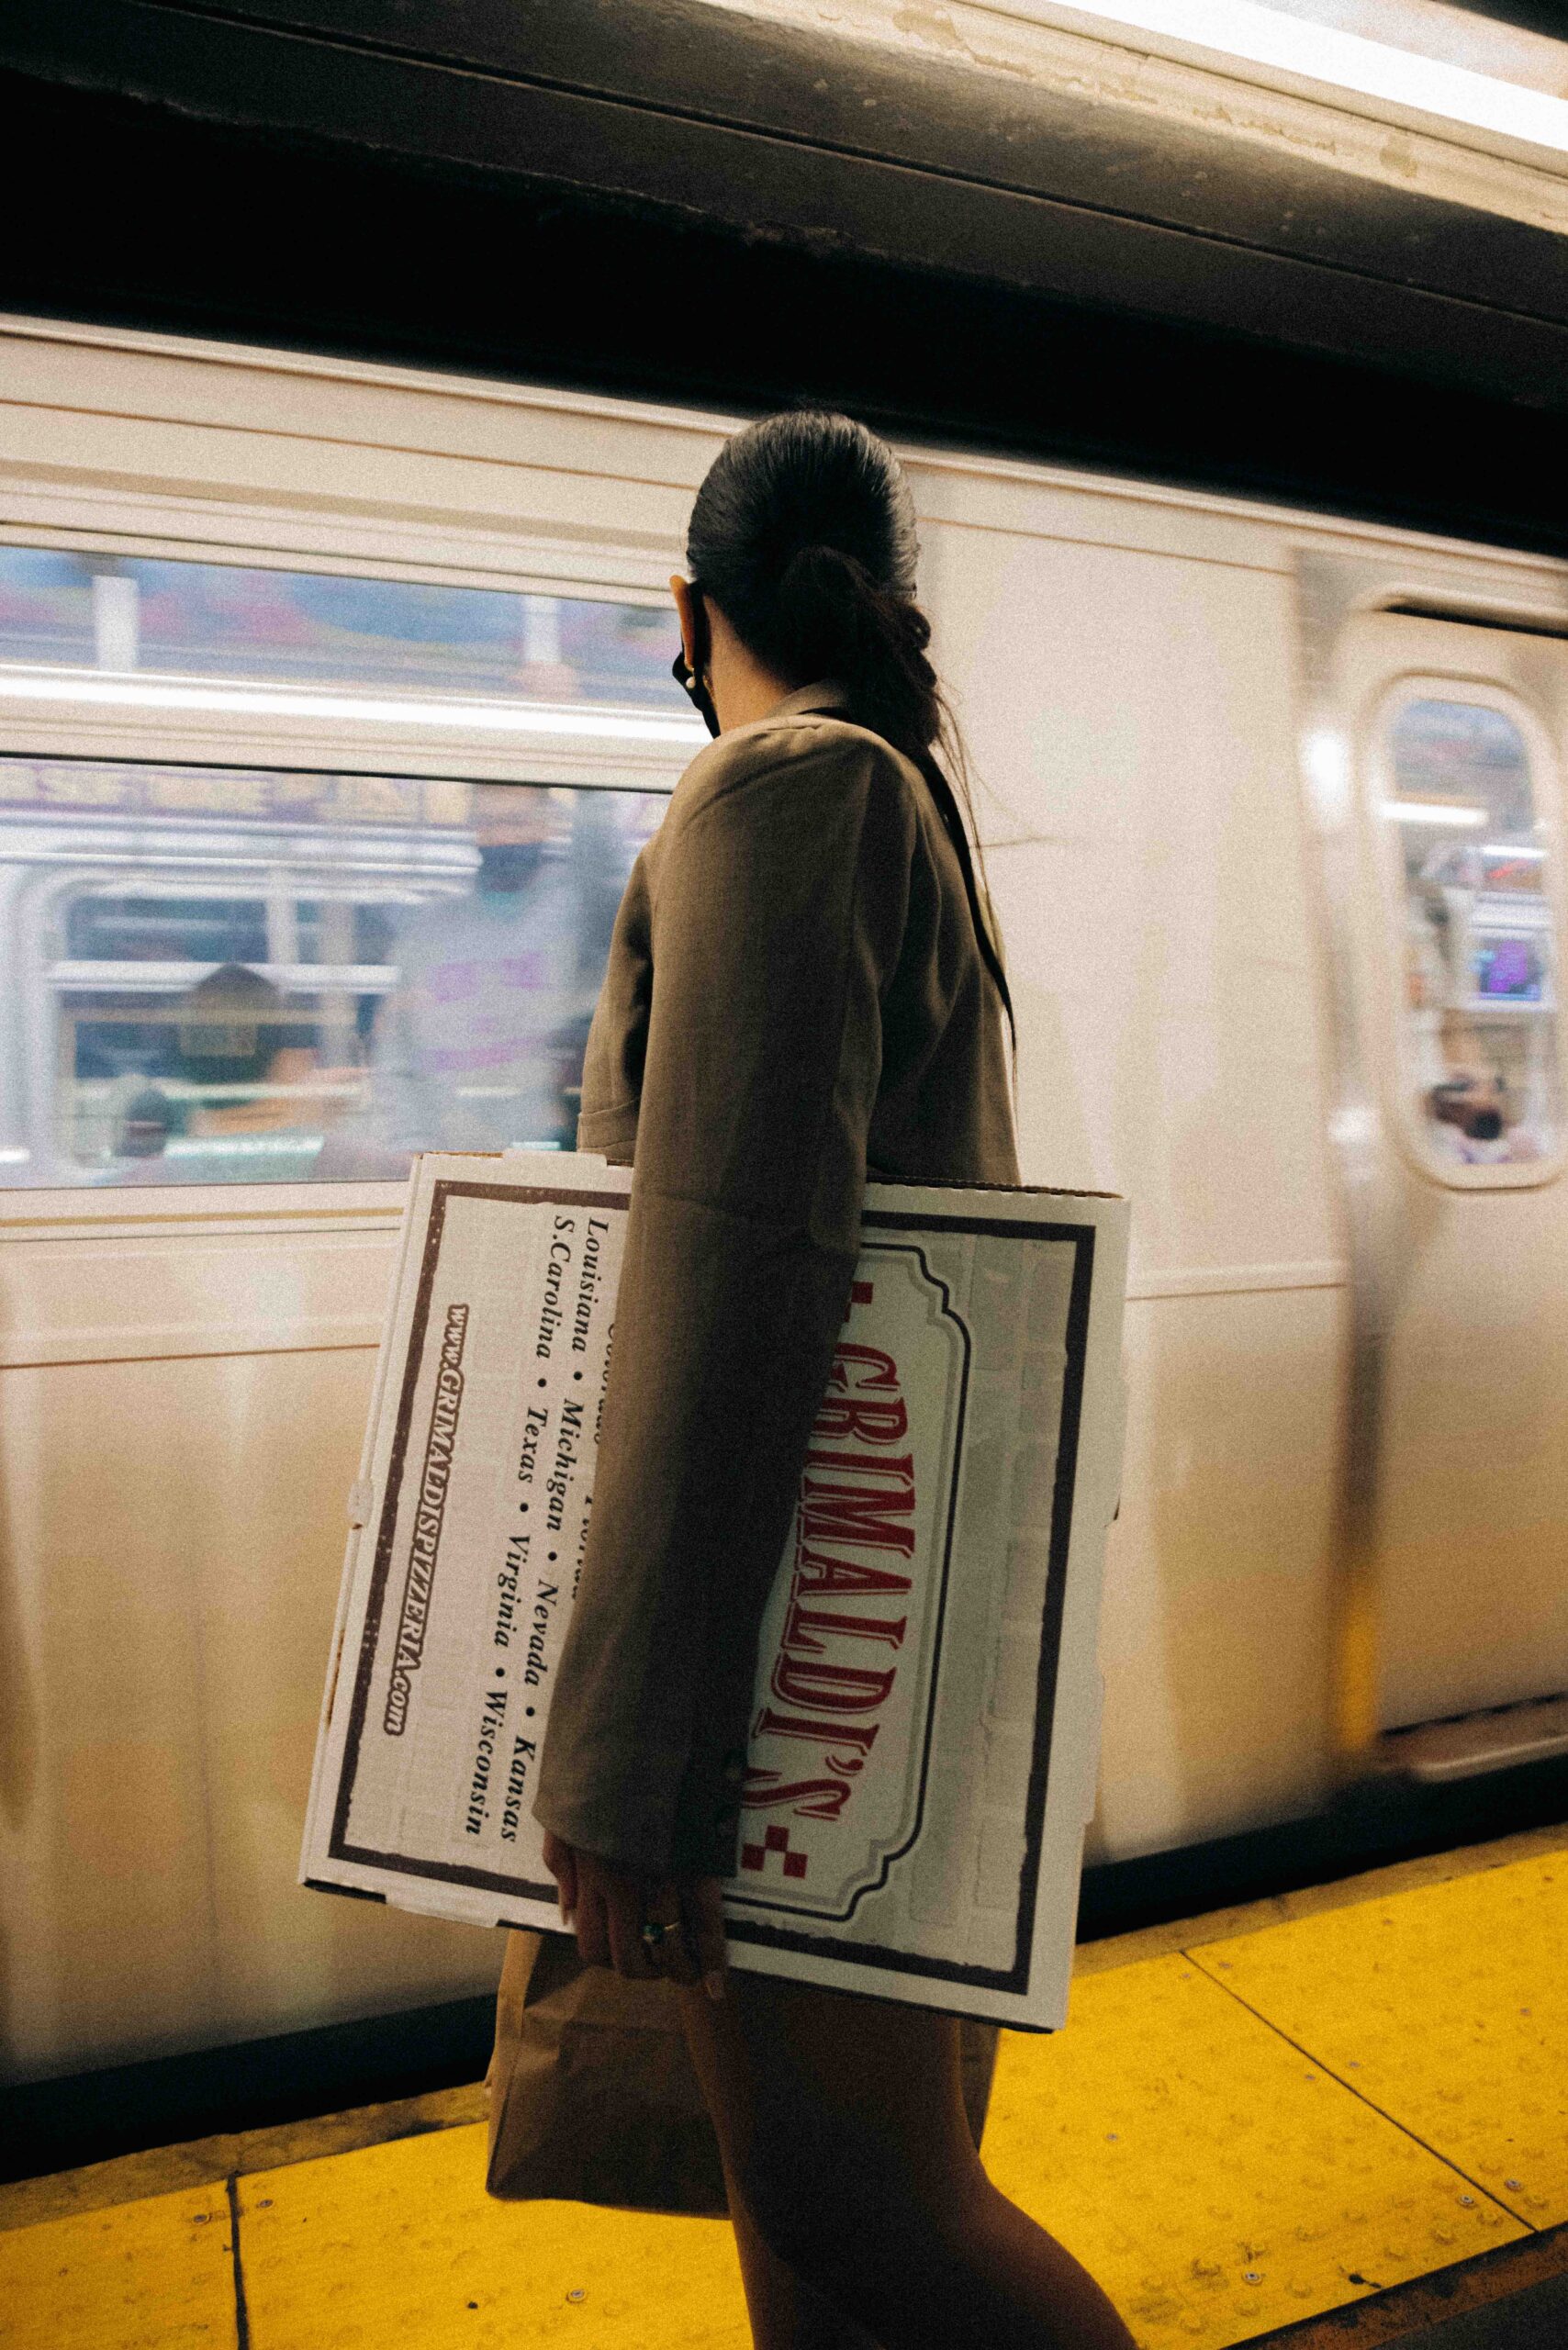 Girl holding pizza box in front of Subway Car